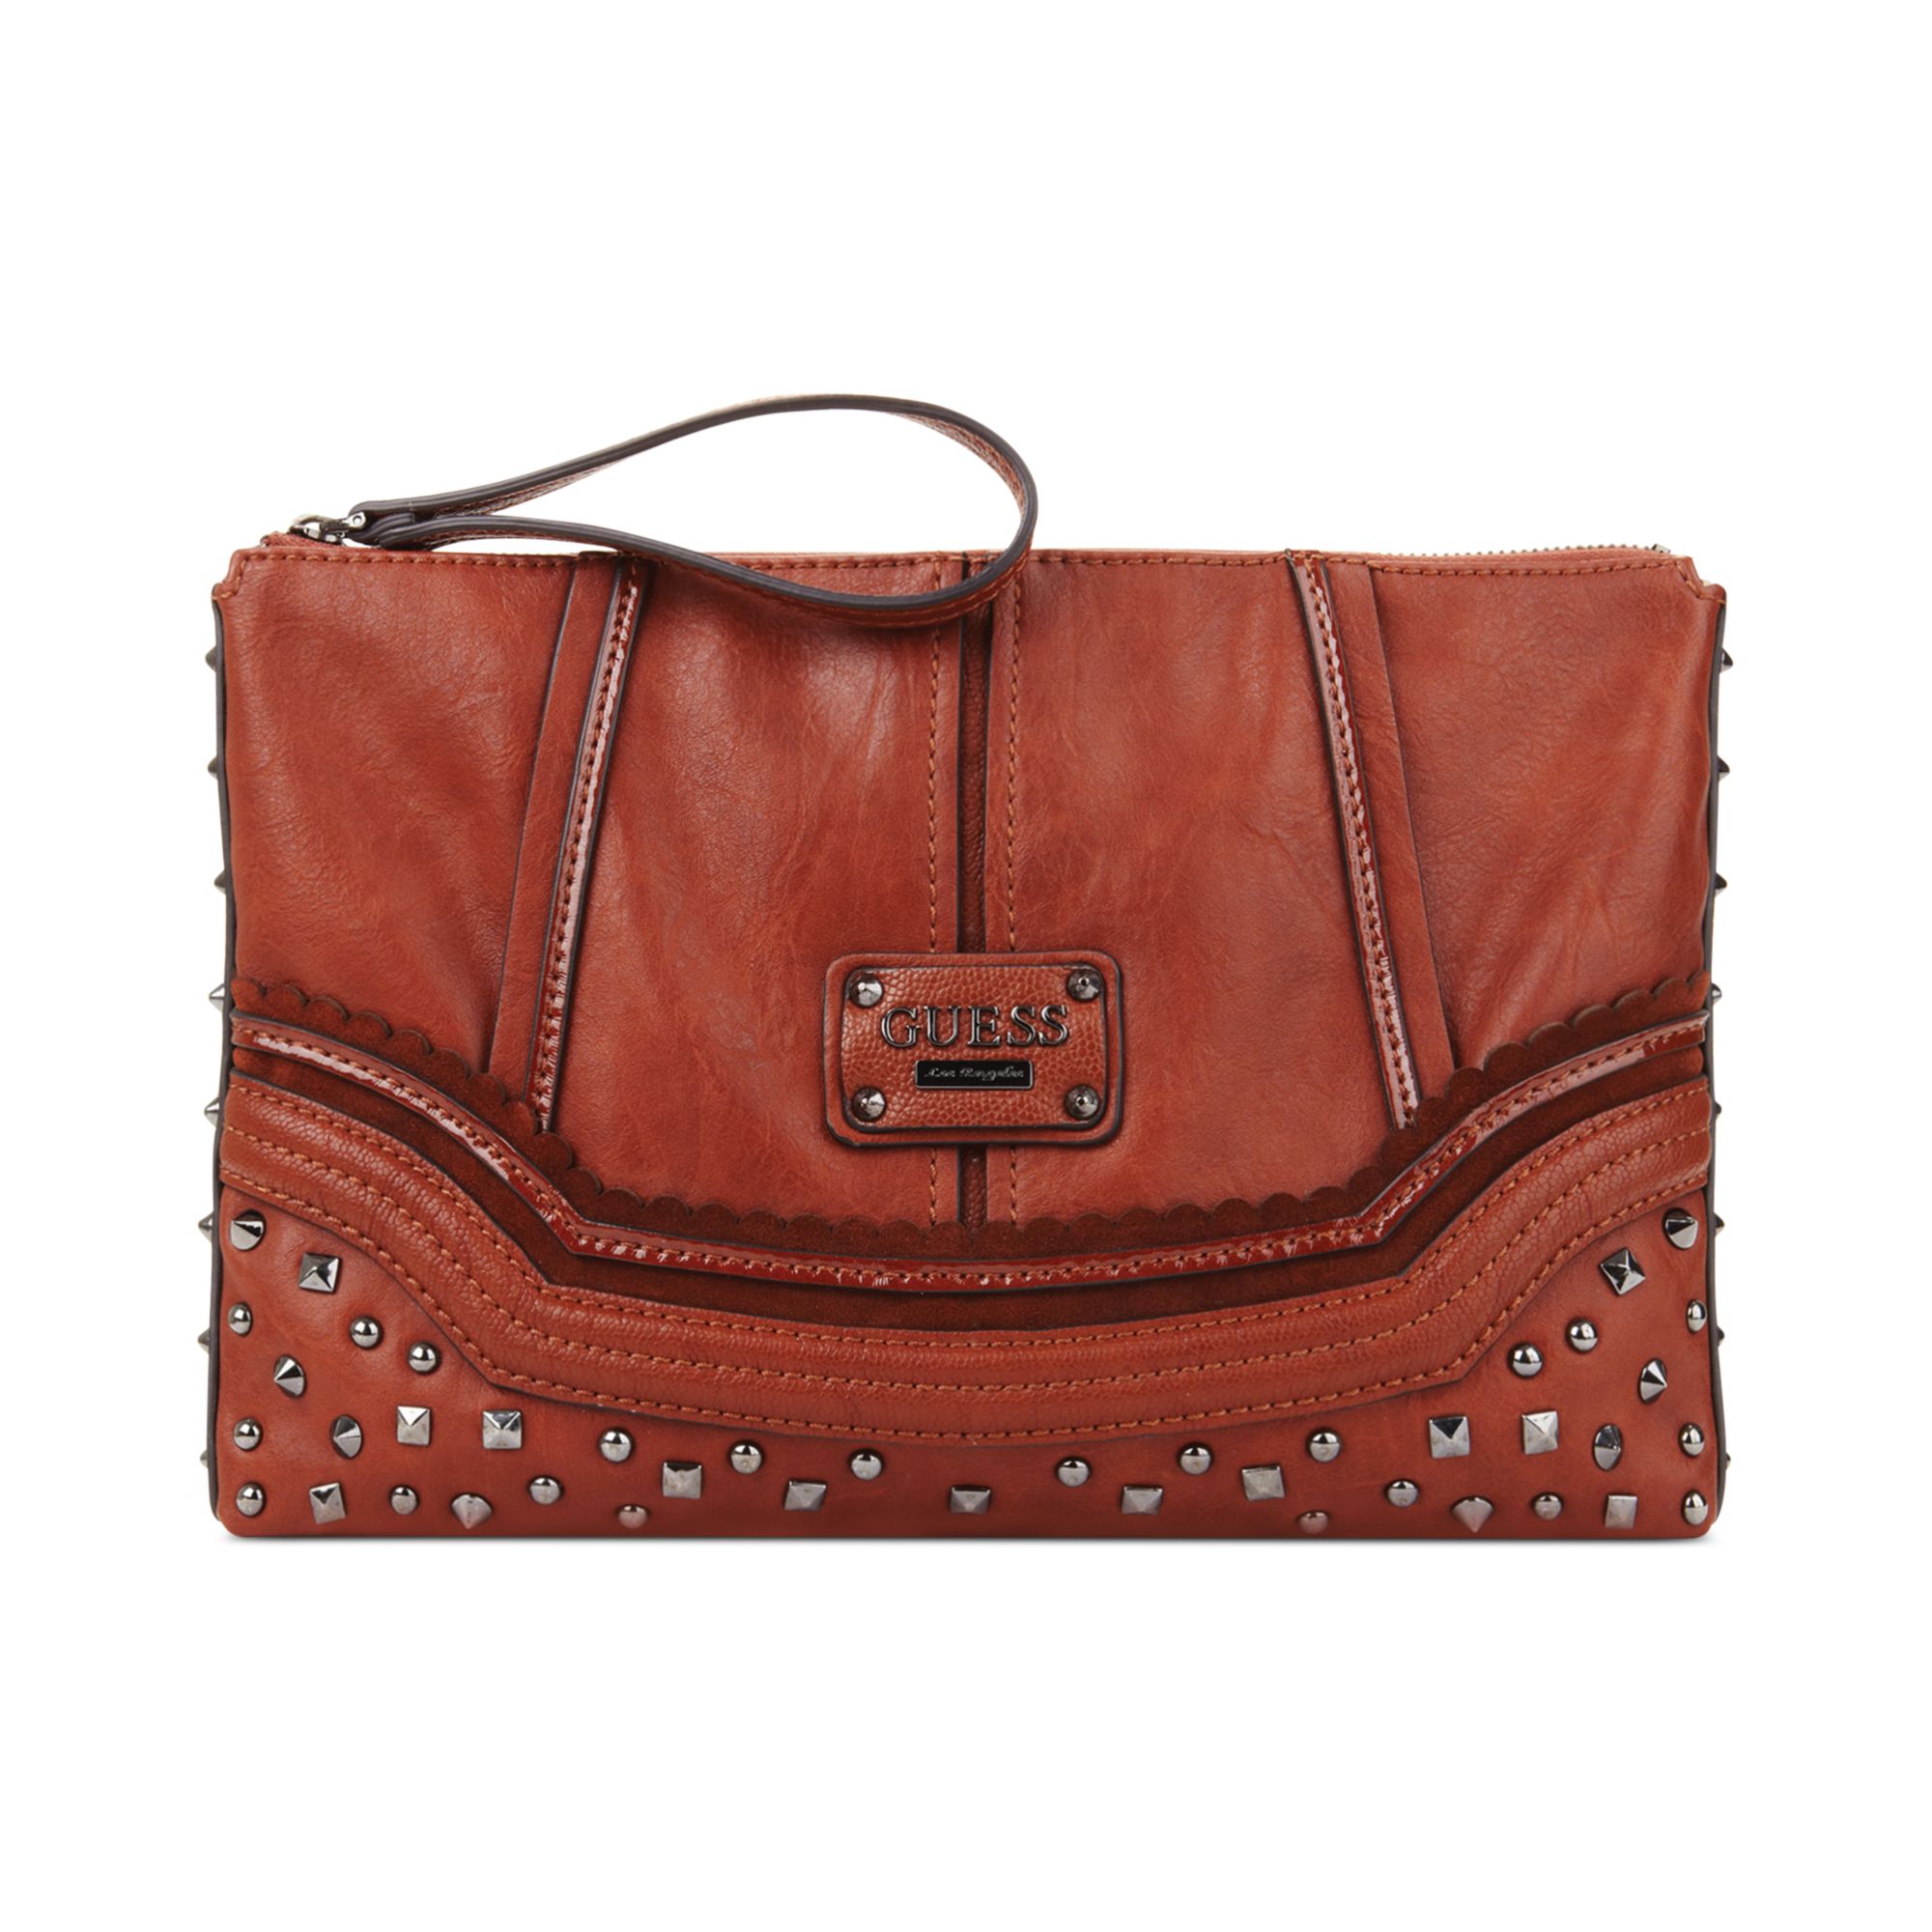 Guess Guess Handbag Chelsea Clutch in Brown (Rust) | Lyst